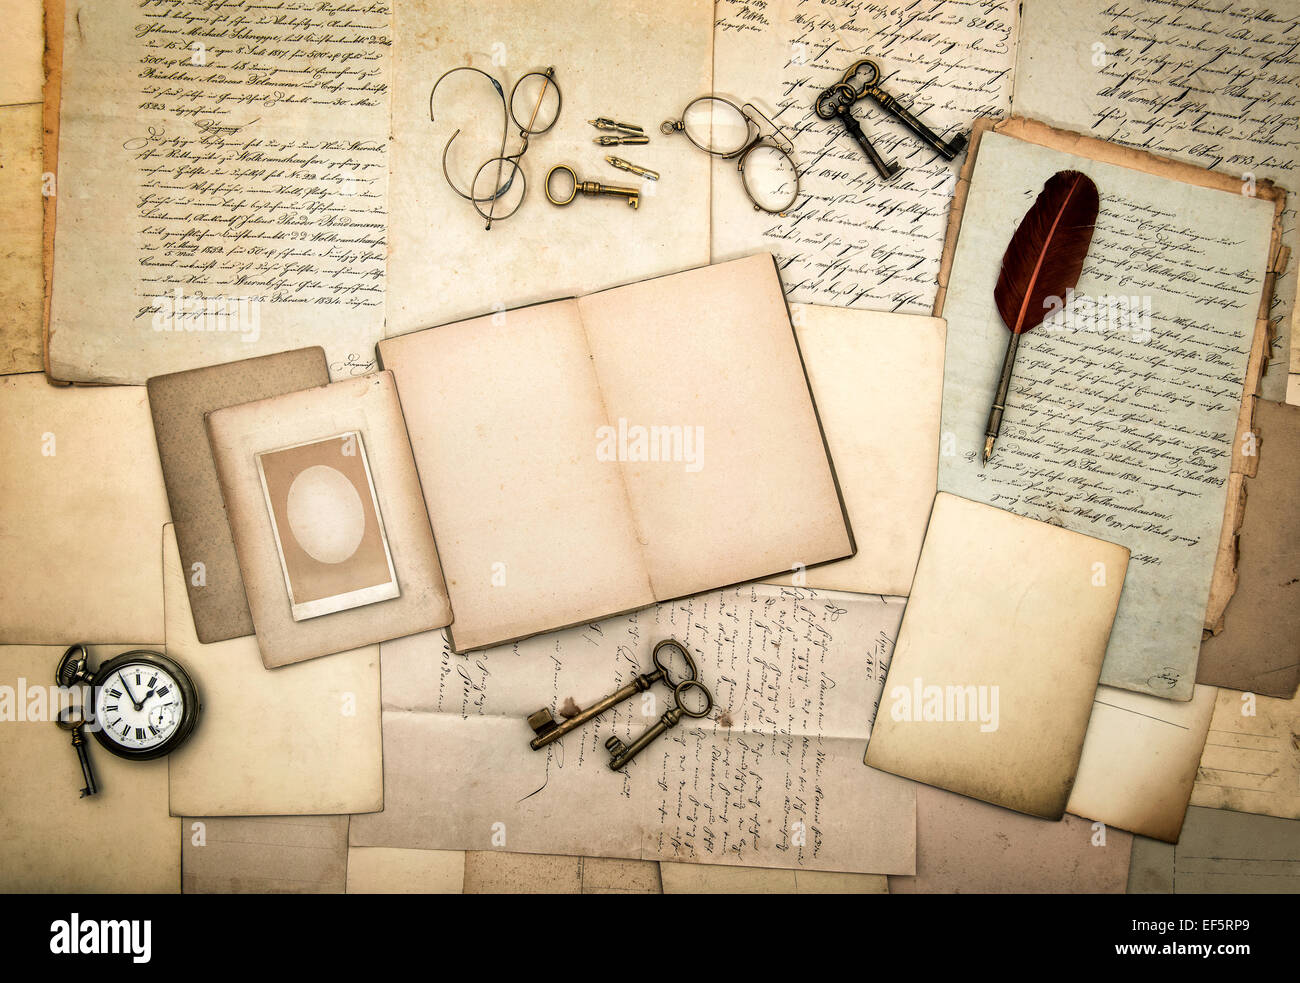 open diary book, old letters, picture frames, vintage accessories and office supplies. nostalgic background Stock Photo